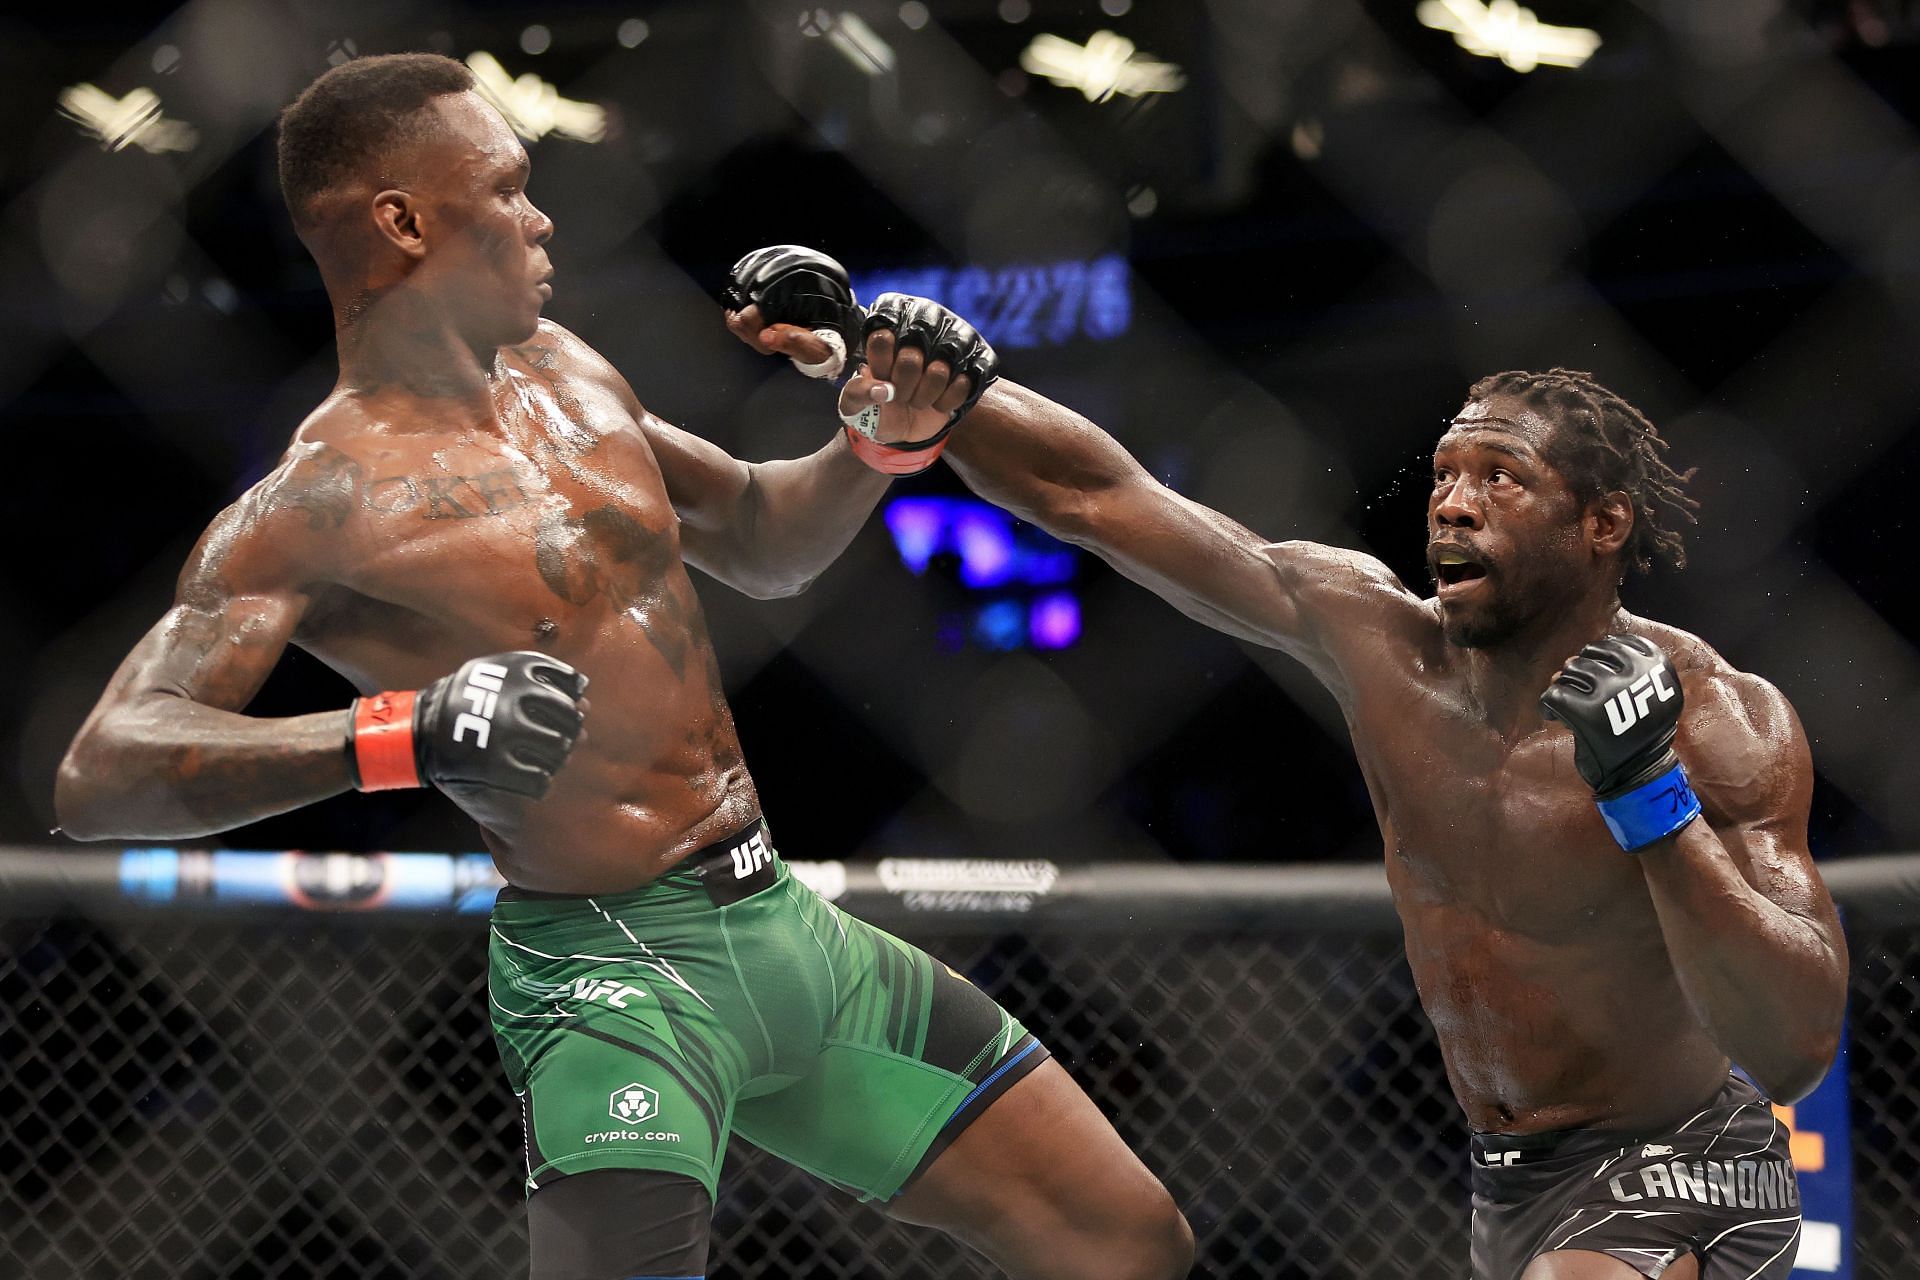 Israel Adesanya has come under fire in previous bouts for his safety first style